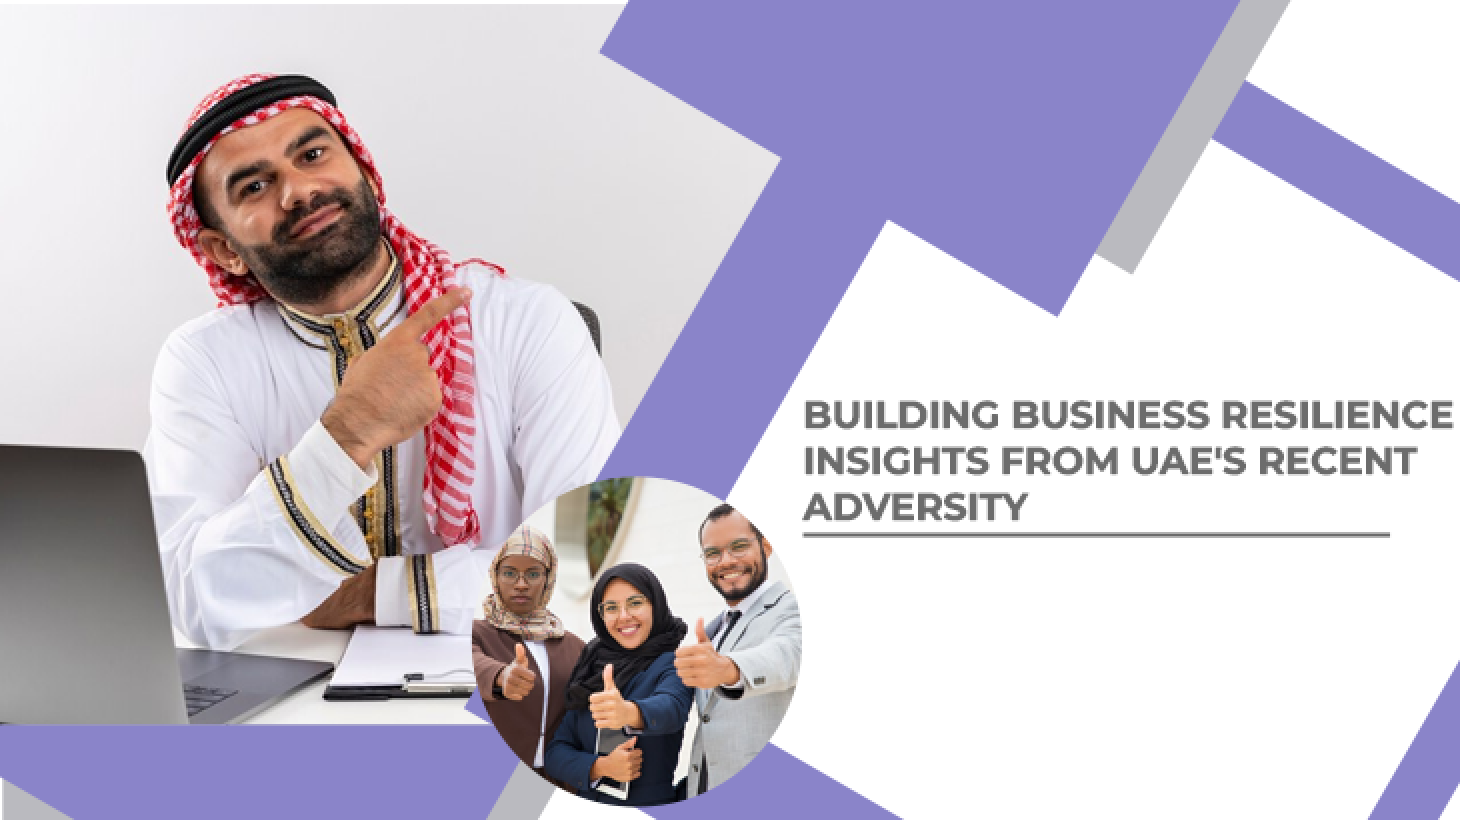 Building Business Resilience Insights From UAE's Recent Adversity